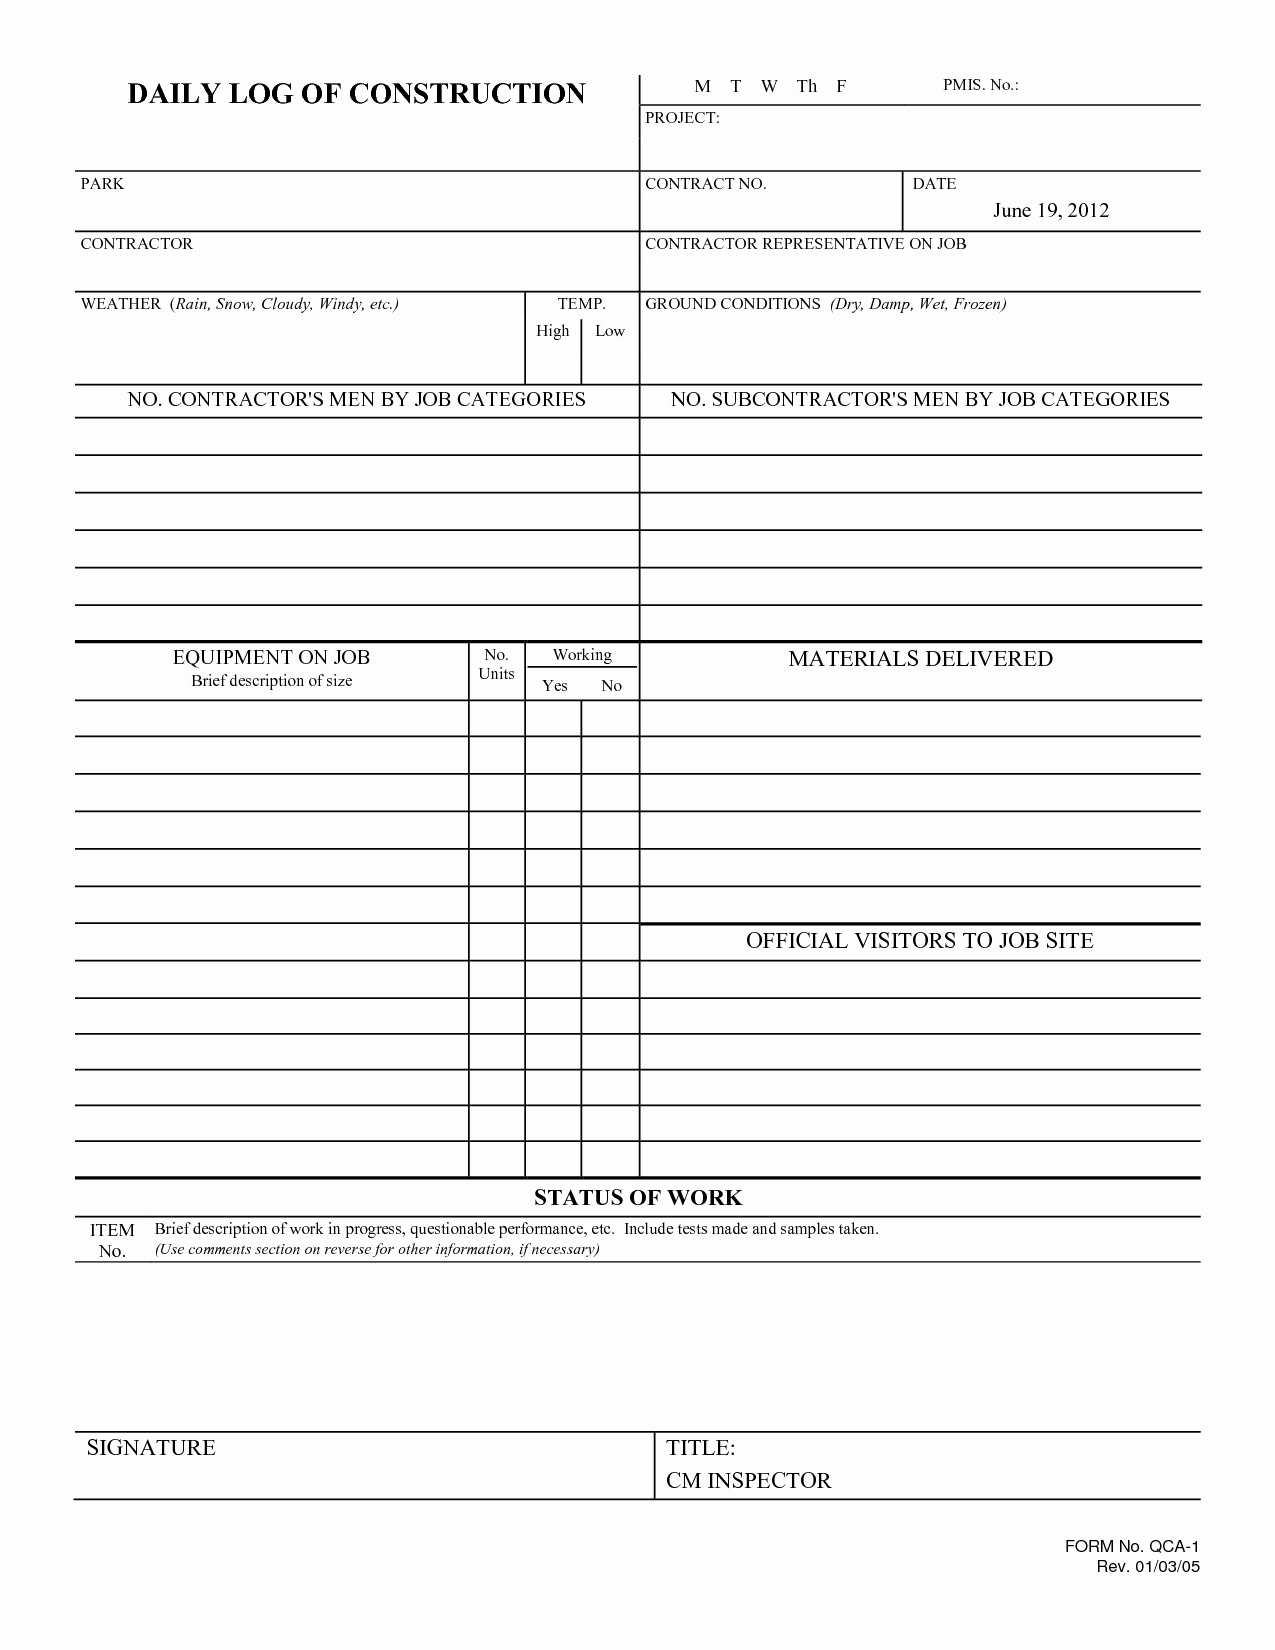 Police Daily Activity Log Template Lovely Best S Of Daily Log Examples Daily Log Book